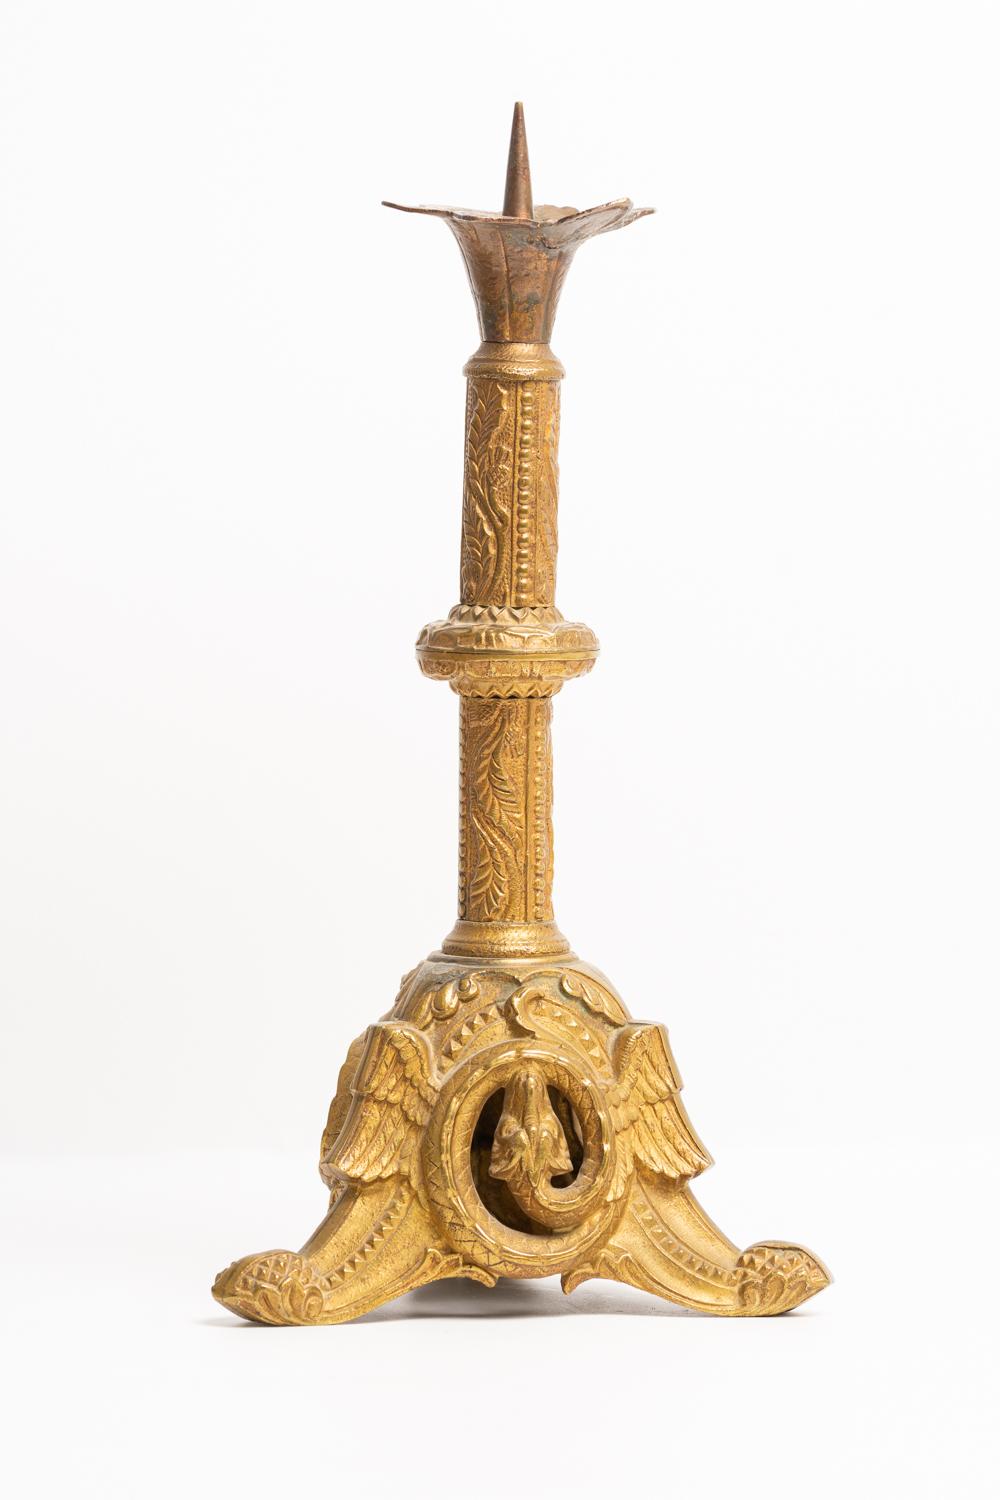 Antique 19th Century French Brass Pricket Candlesticks  In Good Condition For Sale In Portland, England